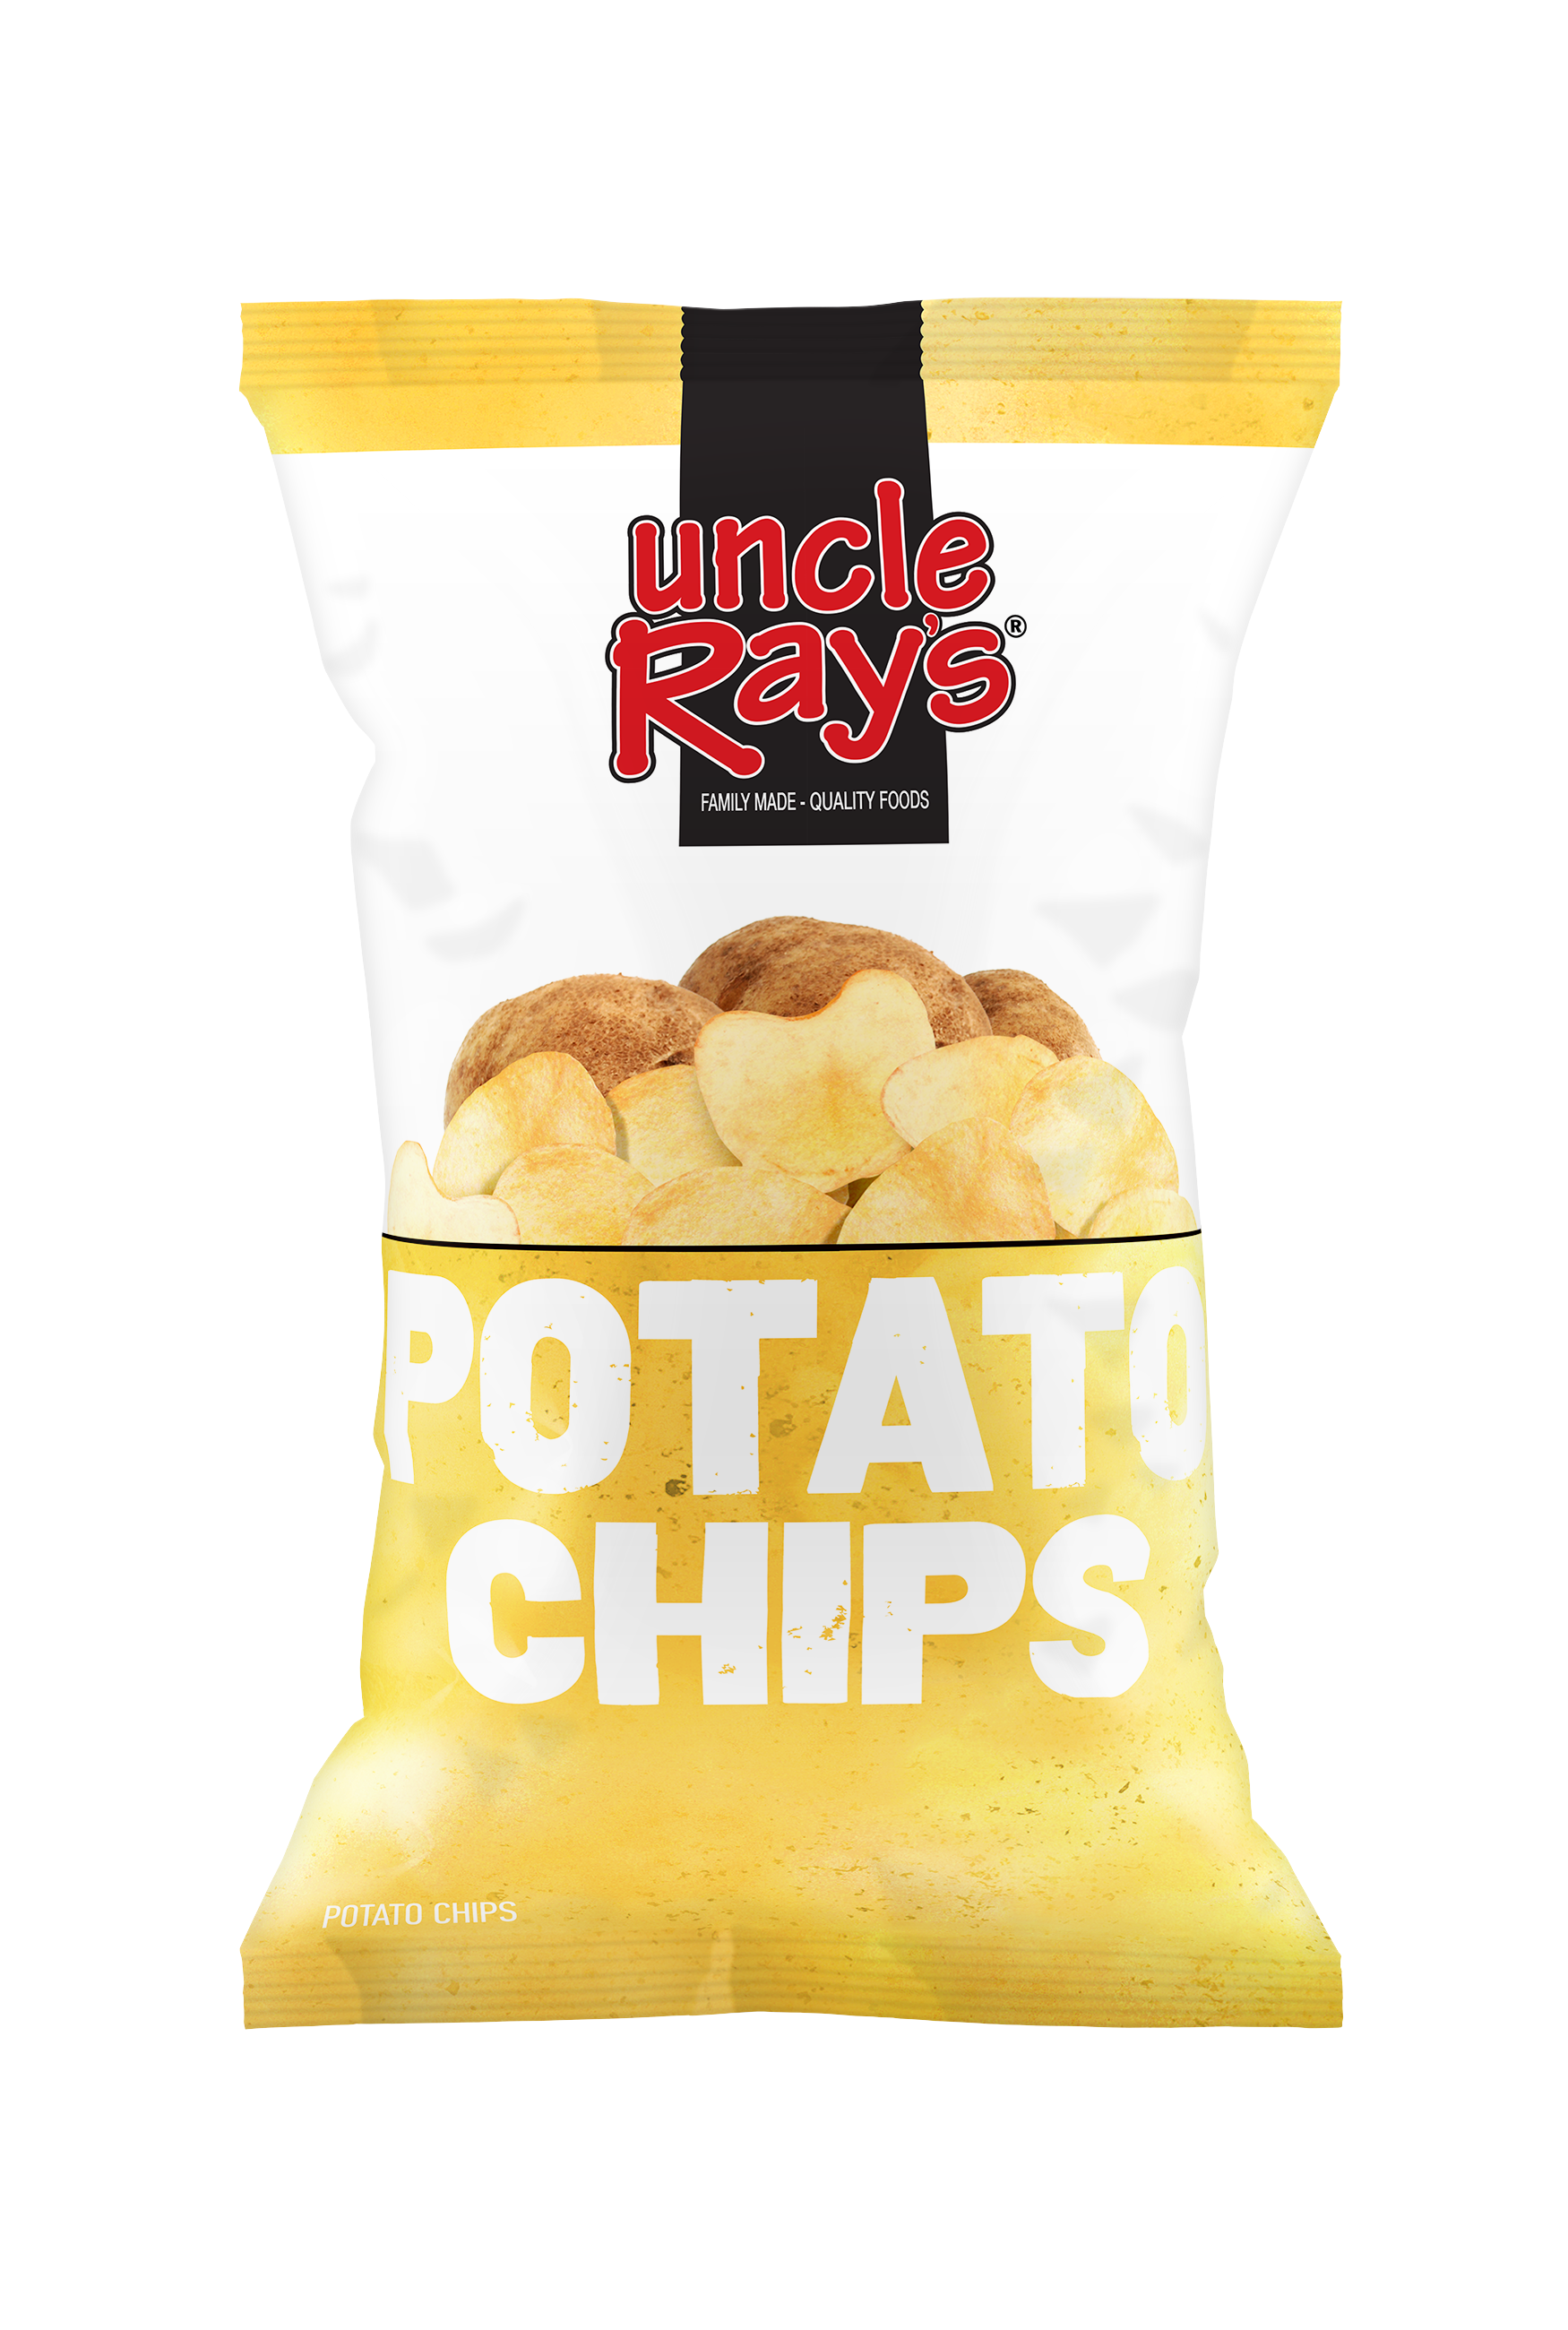 Uncle rays regular chips 3oz